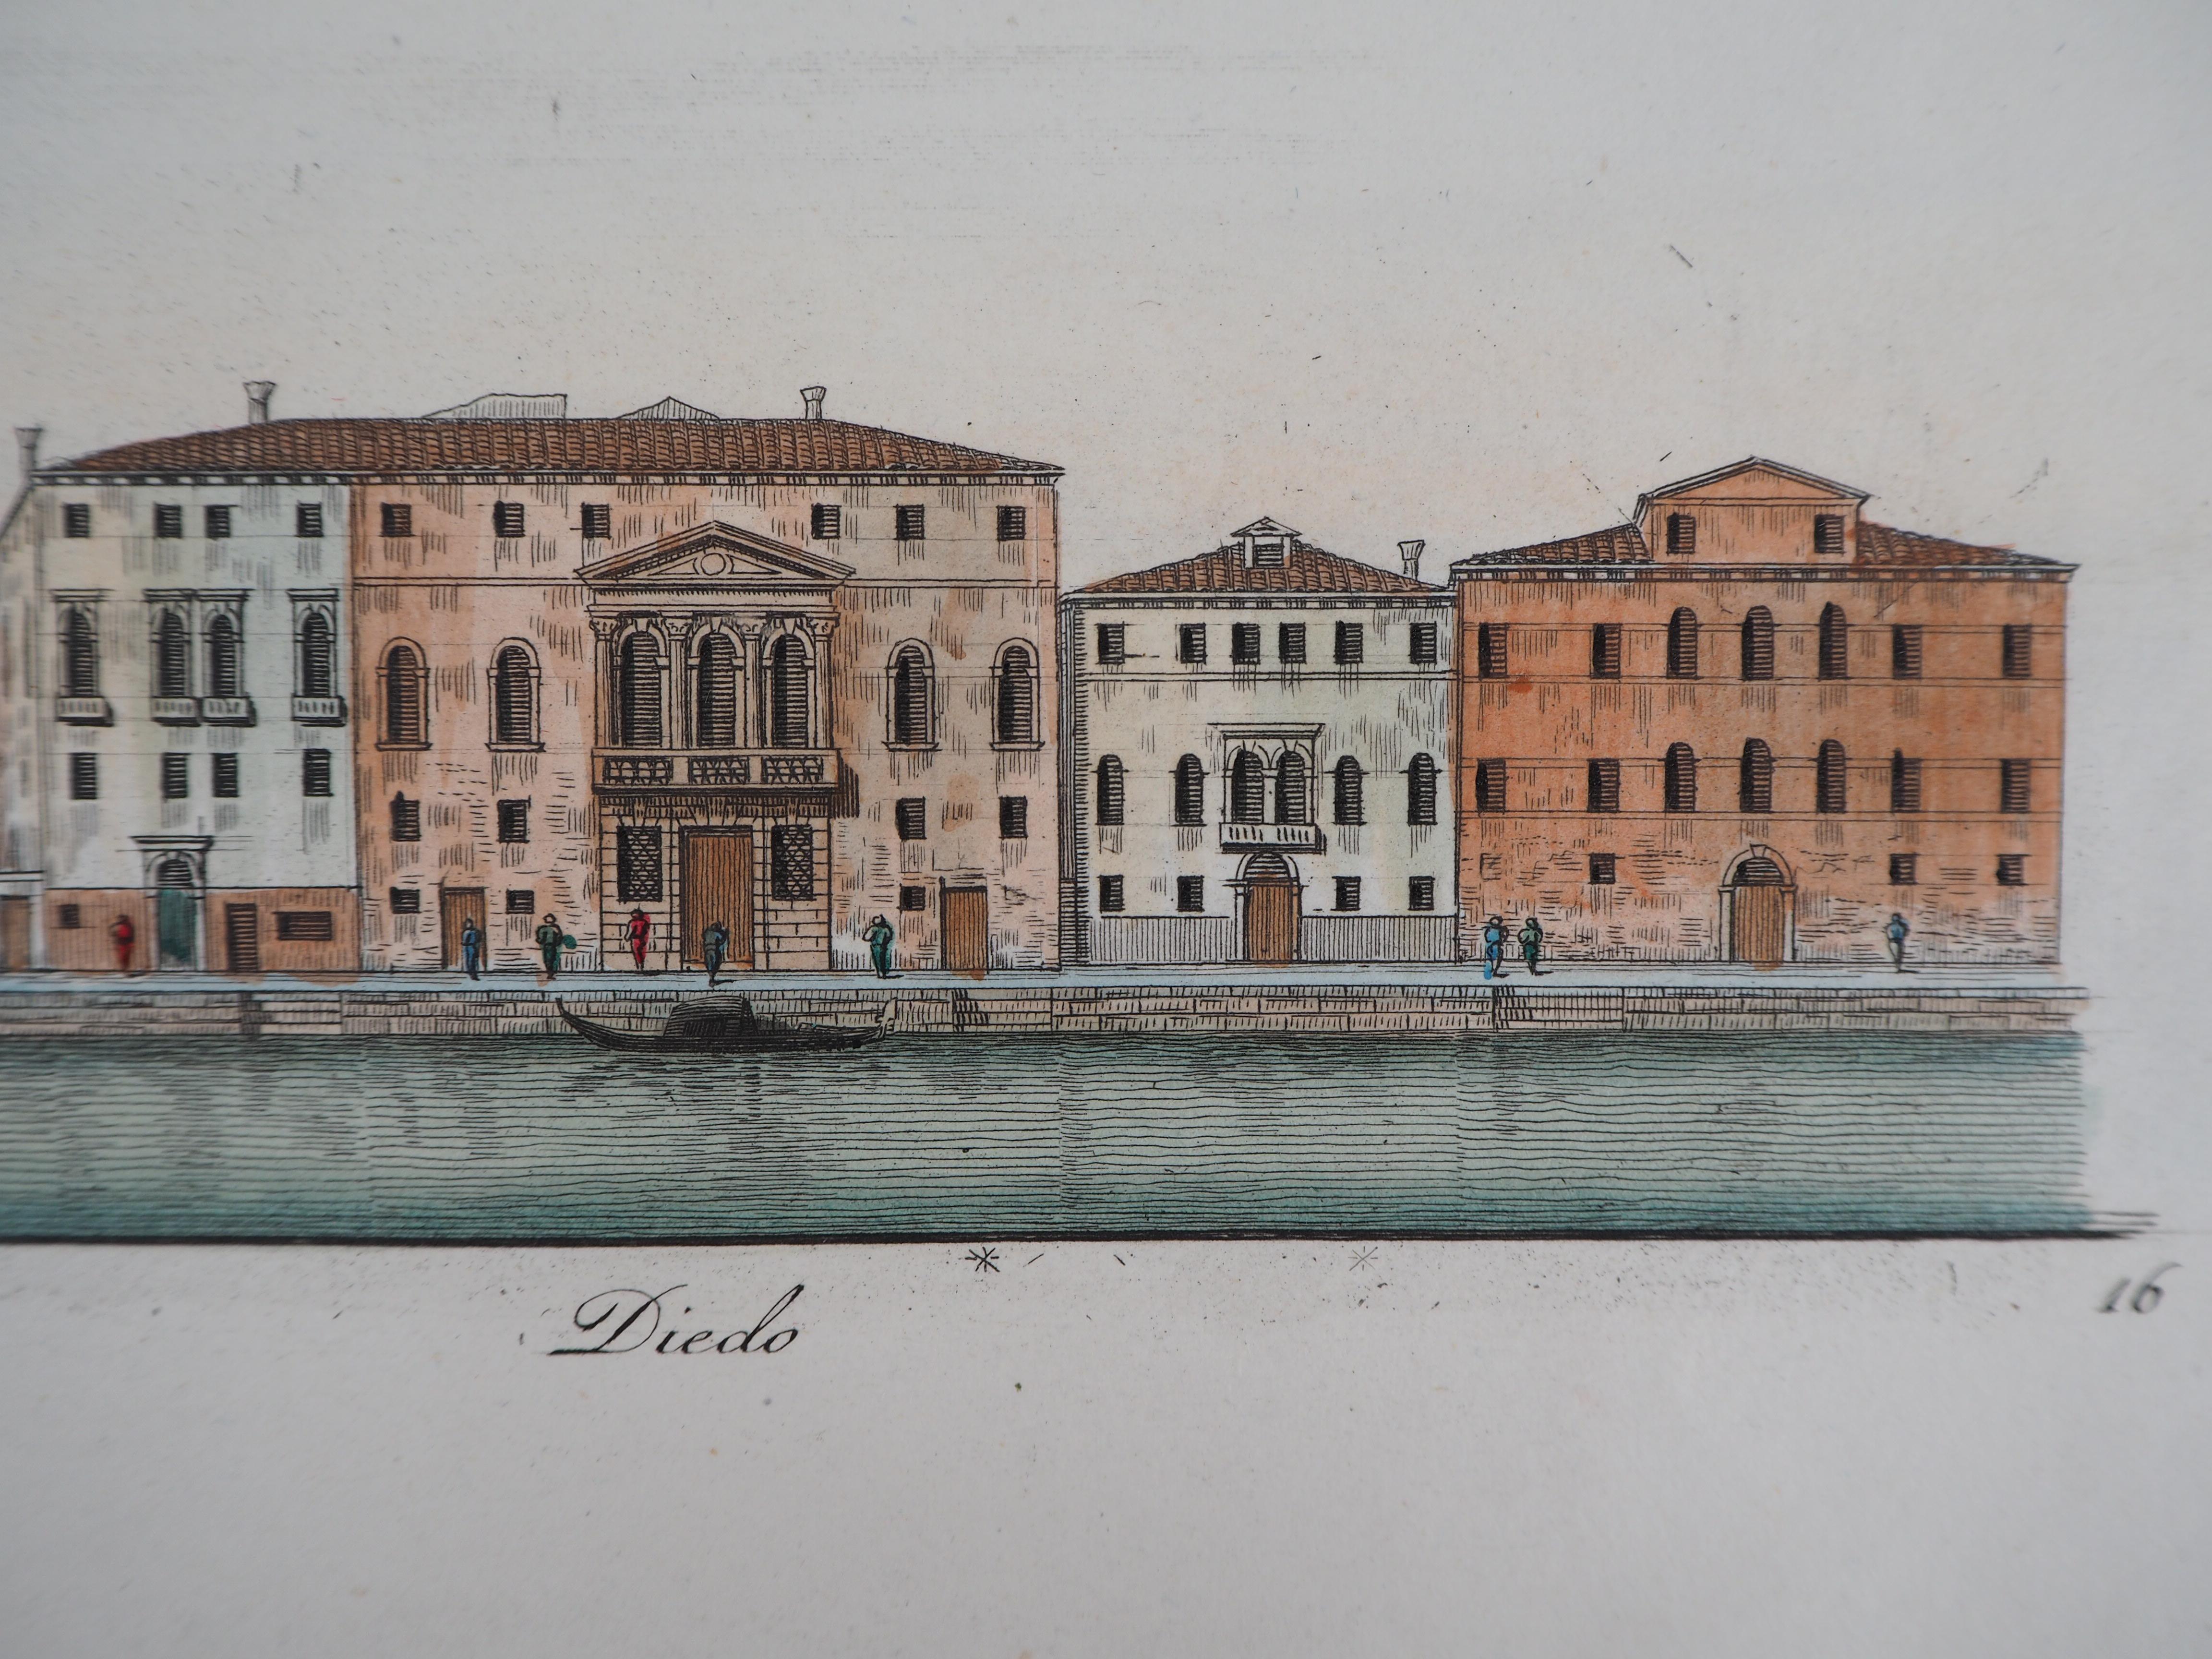 Dionisio MORETTI 
Venice, San Simeone Piccolo Church, 1831

Original etching 
Finely enhanced by hand with watercolor
On vellum  26 x 41 cm (c. 10.2 x 16 inch)

Very good condition, slight foxings on the edges (see pictures)